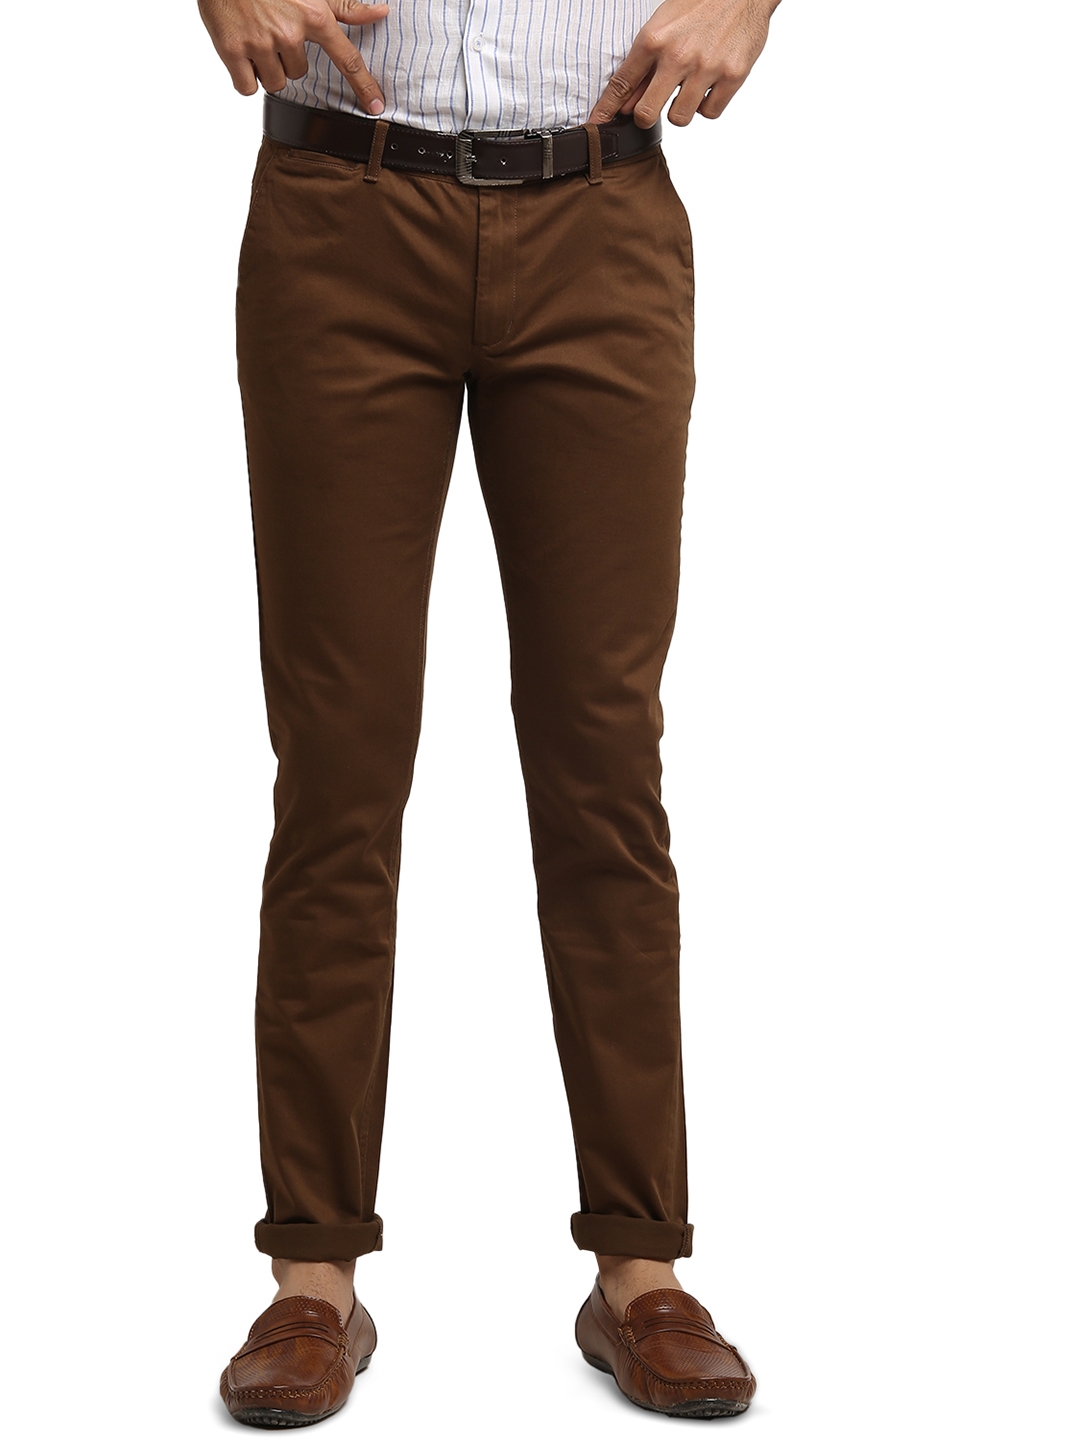 Greenfibre | Brown Solid Super Slim Fit Casual Trouser | Greenfibre 0